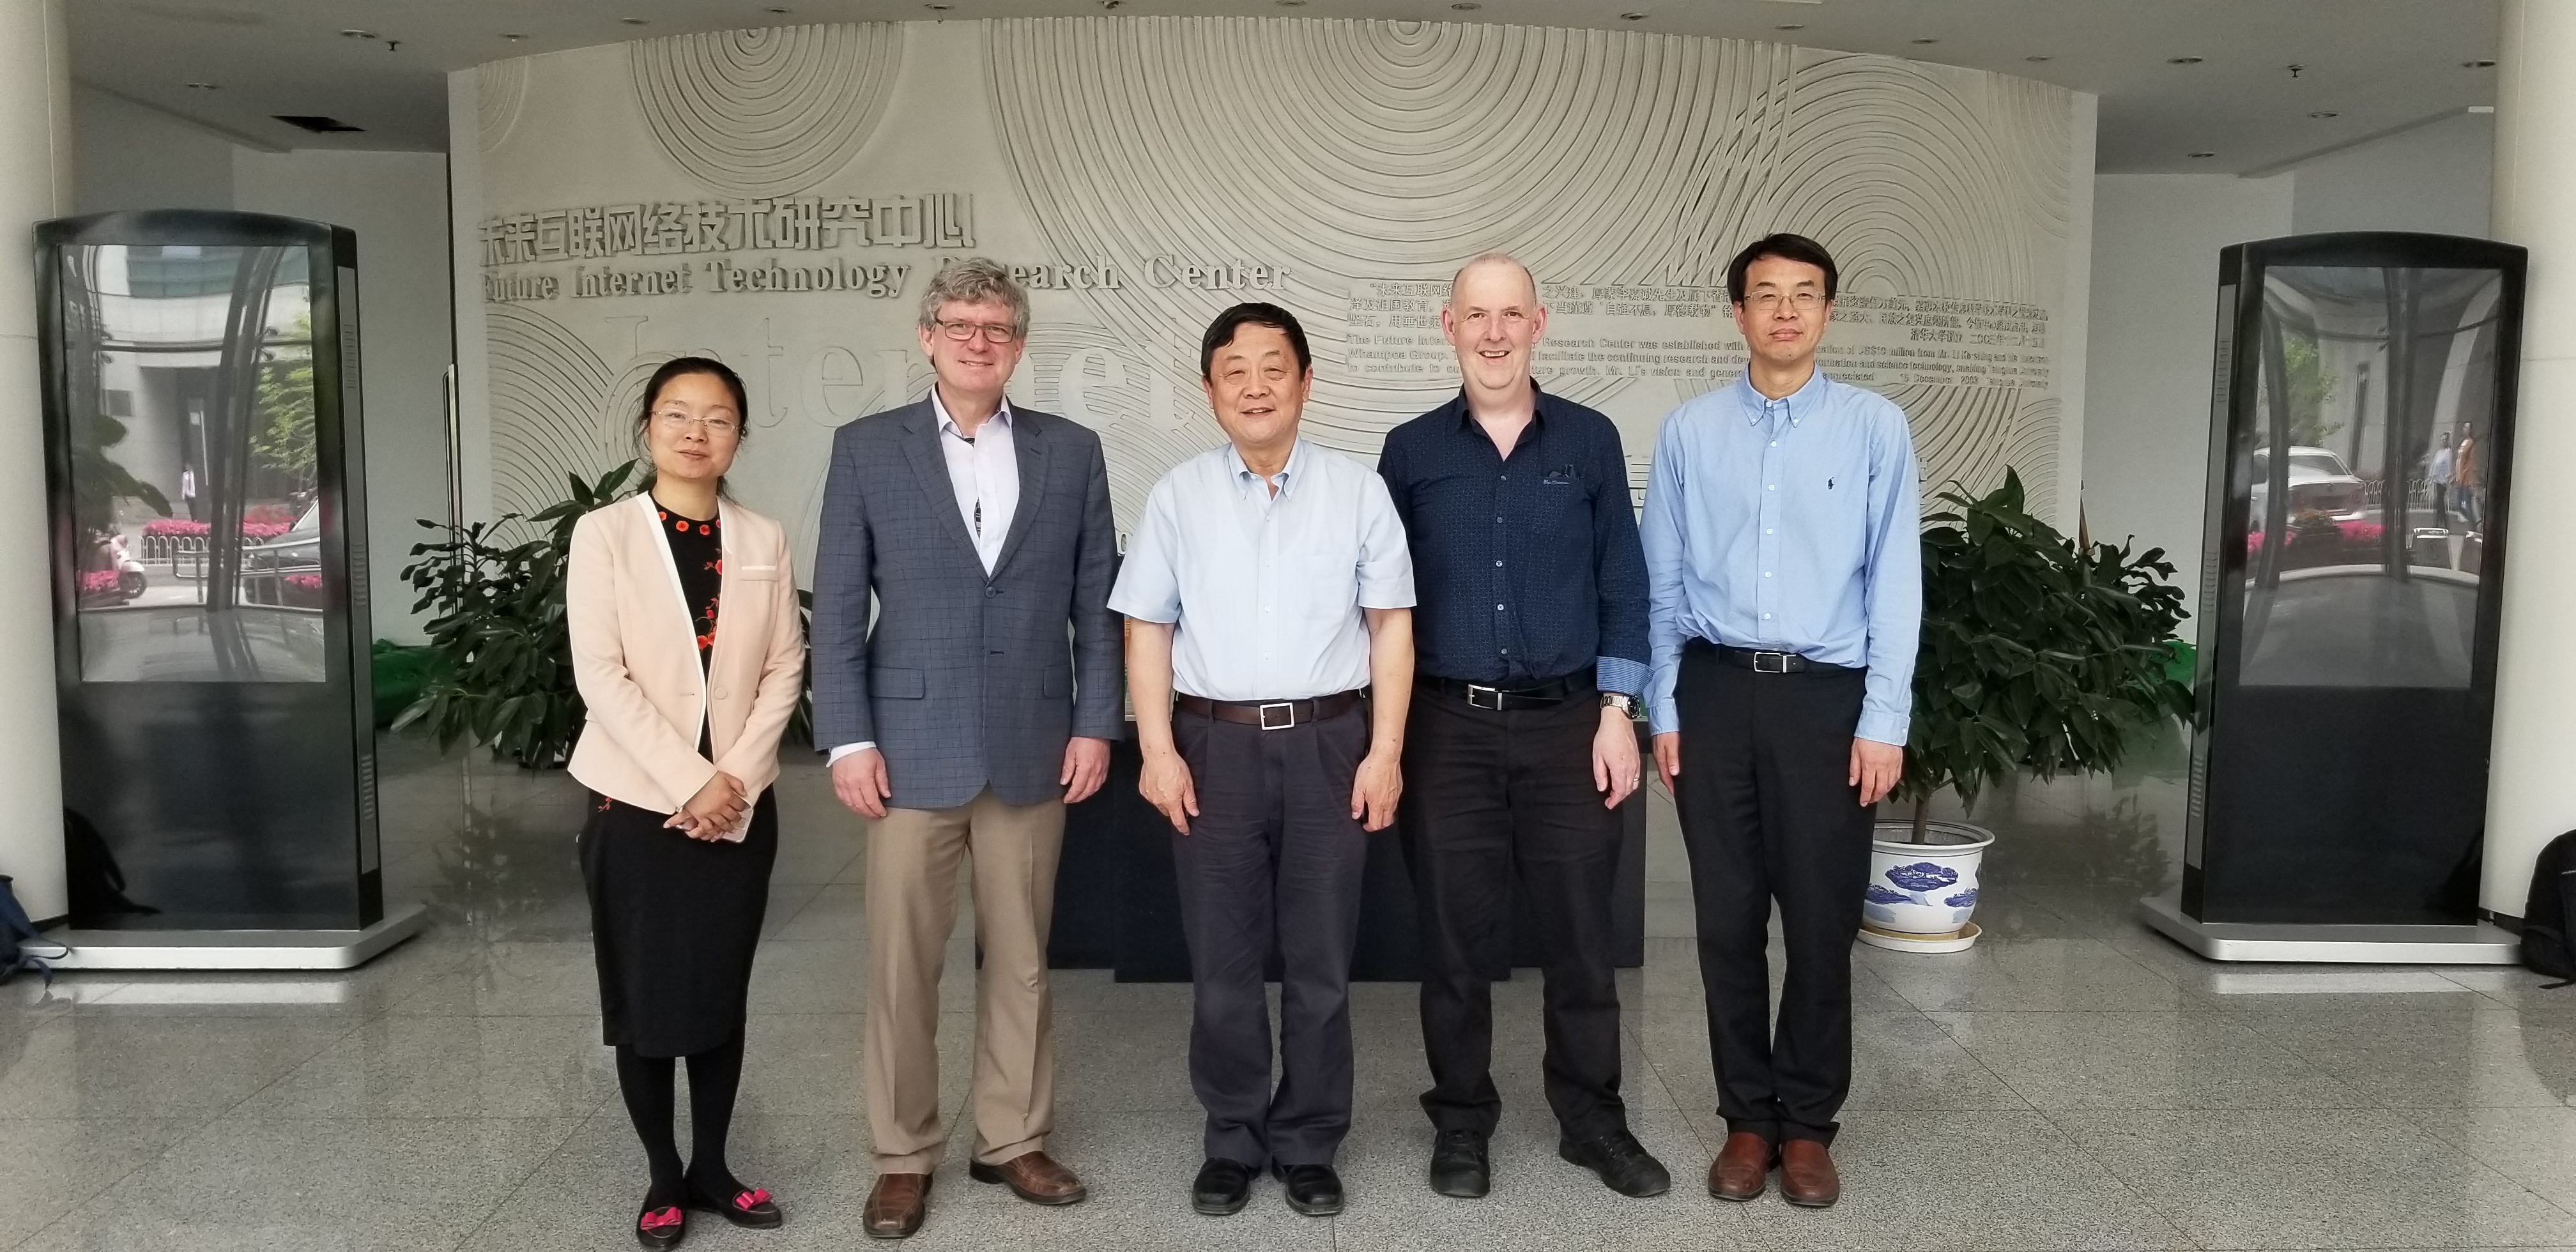 Dean of math, and director of CS visited to Tsinghua on 2019-05-15